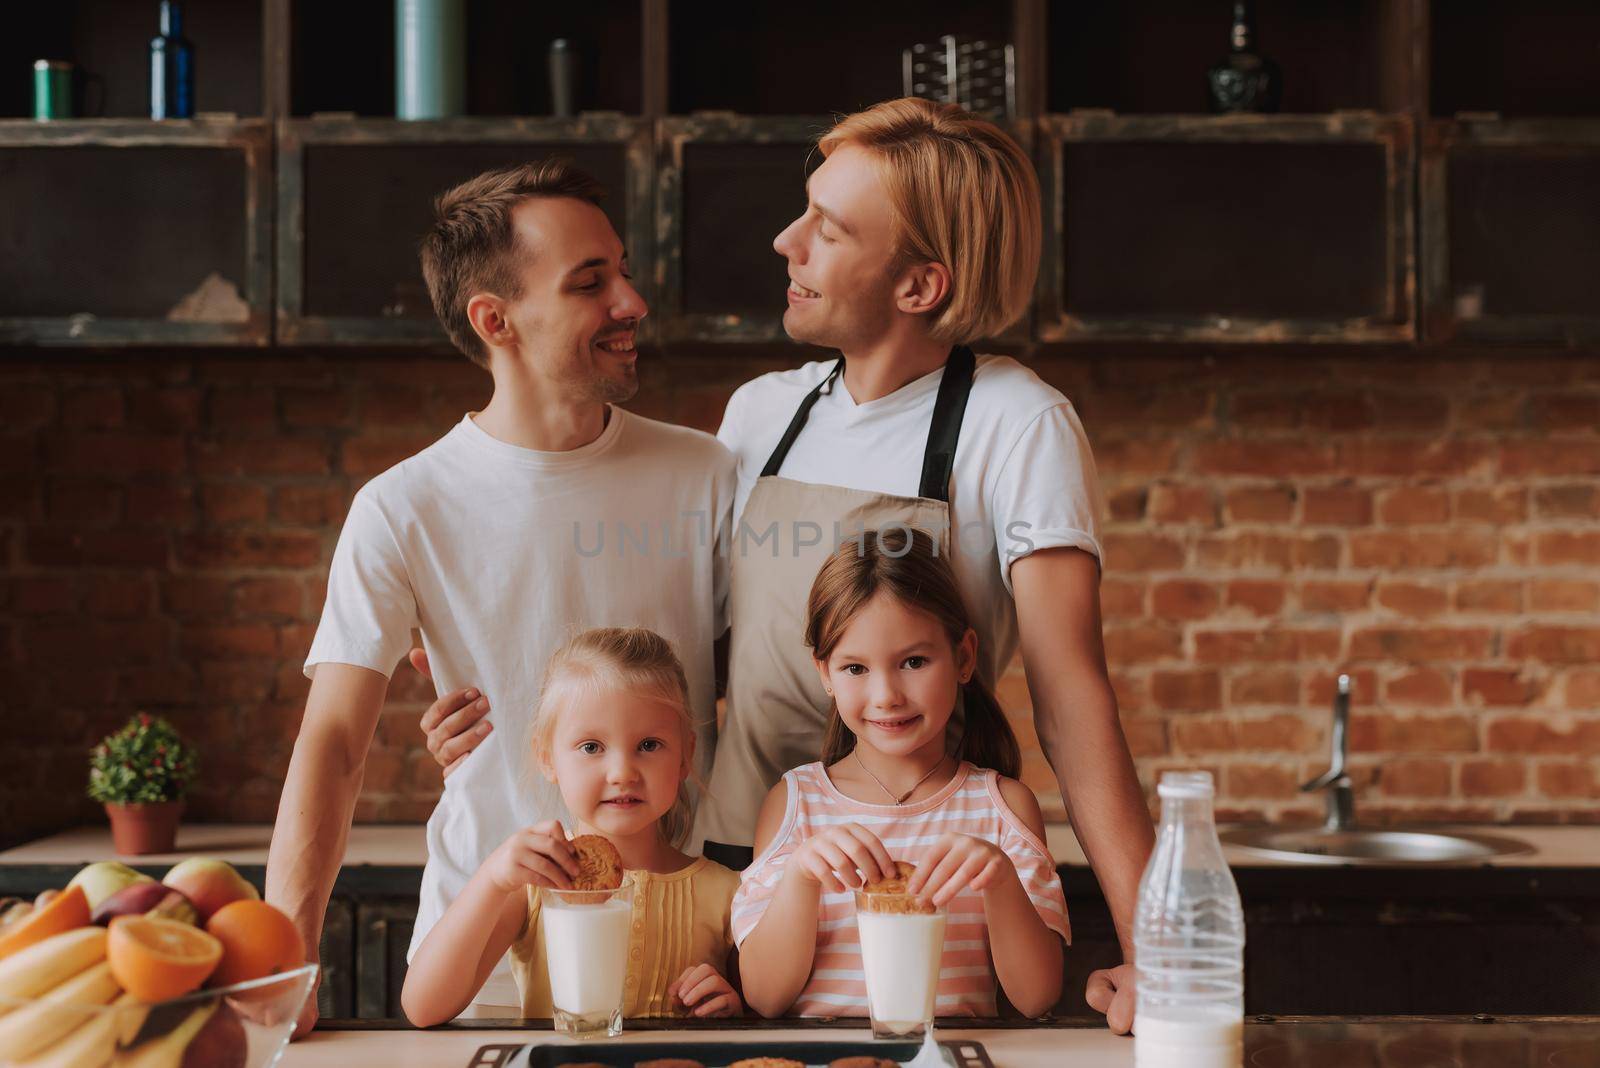 Gay couple with their adopted cute daughters cooking on kitchen. Lgbt family at home. Portrait of two handsome men and their two little daughters eating cookies and drinking milk.